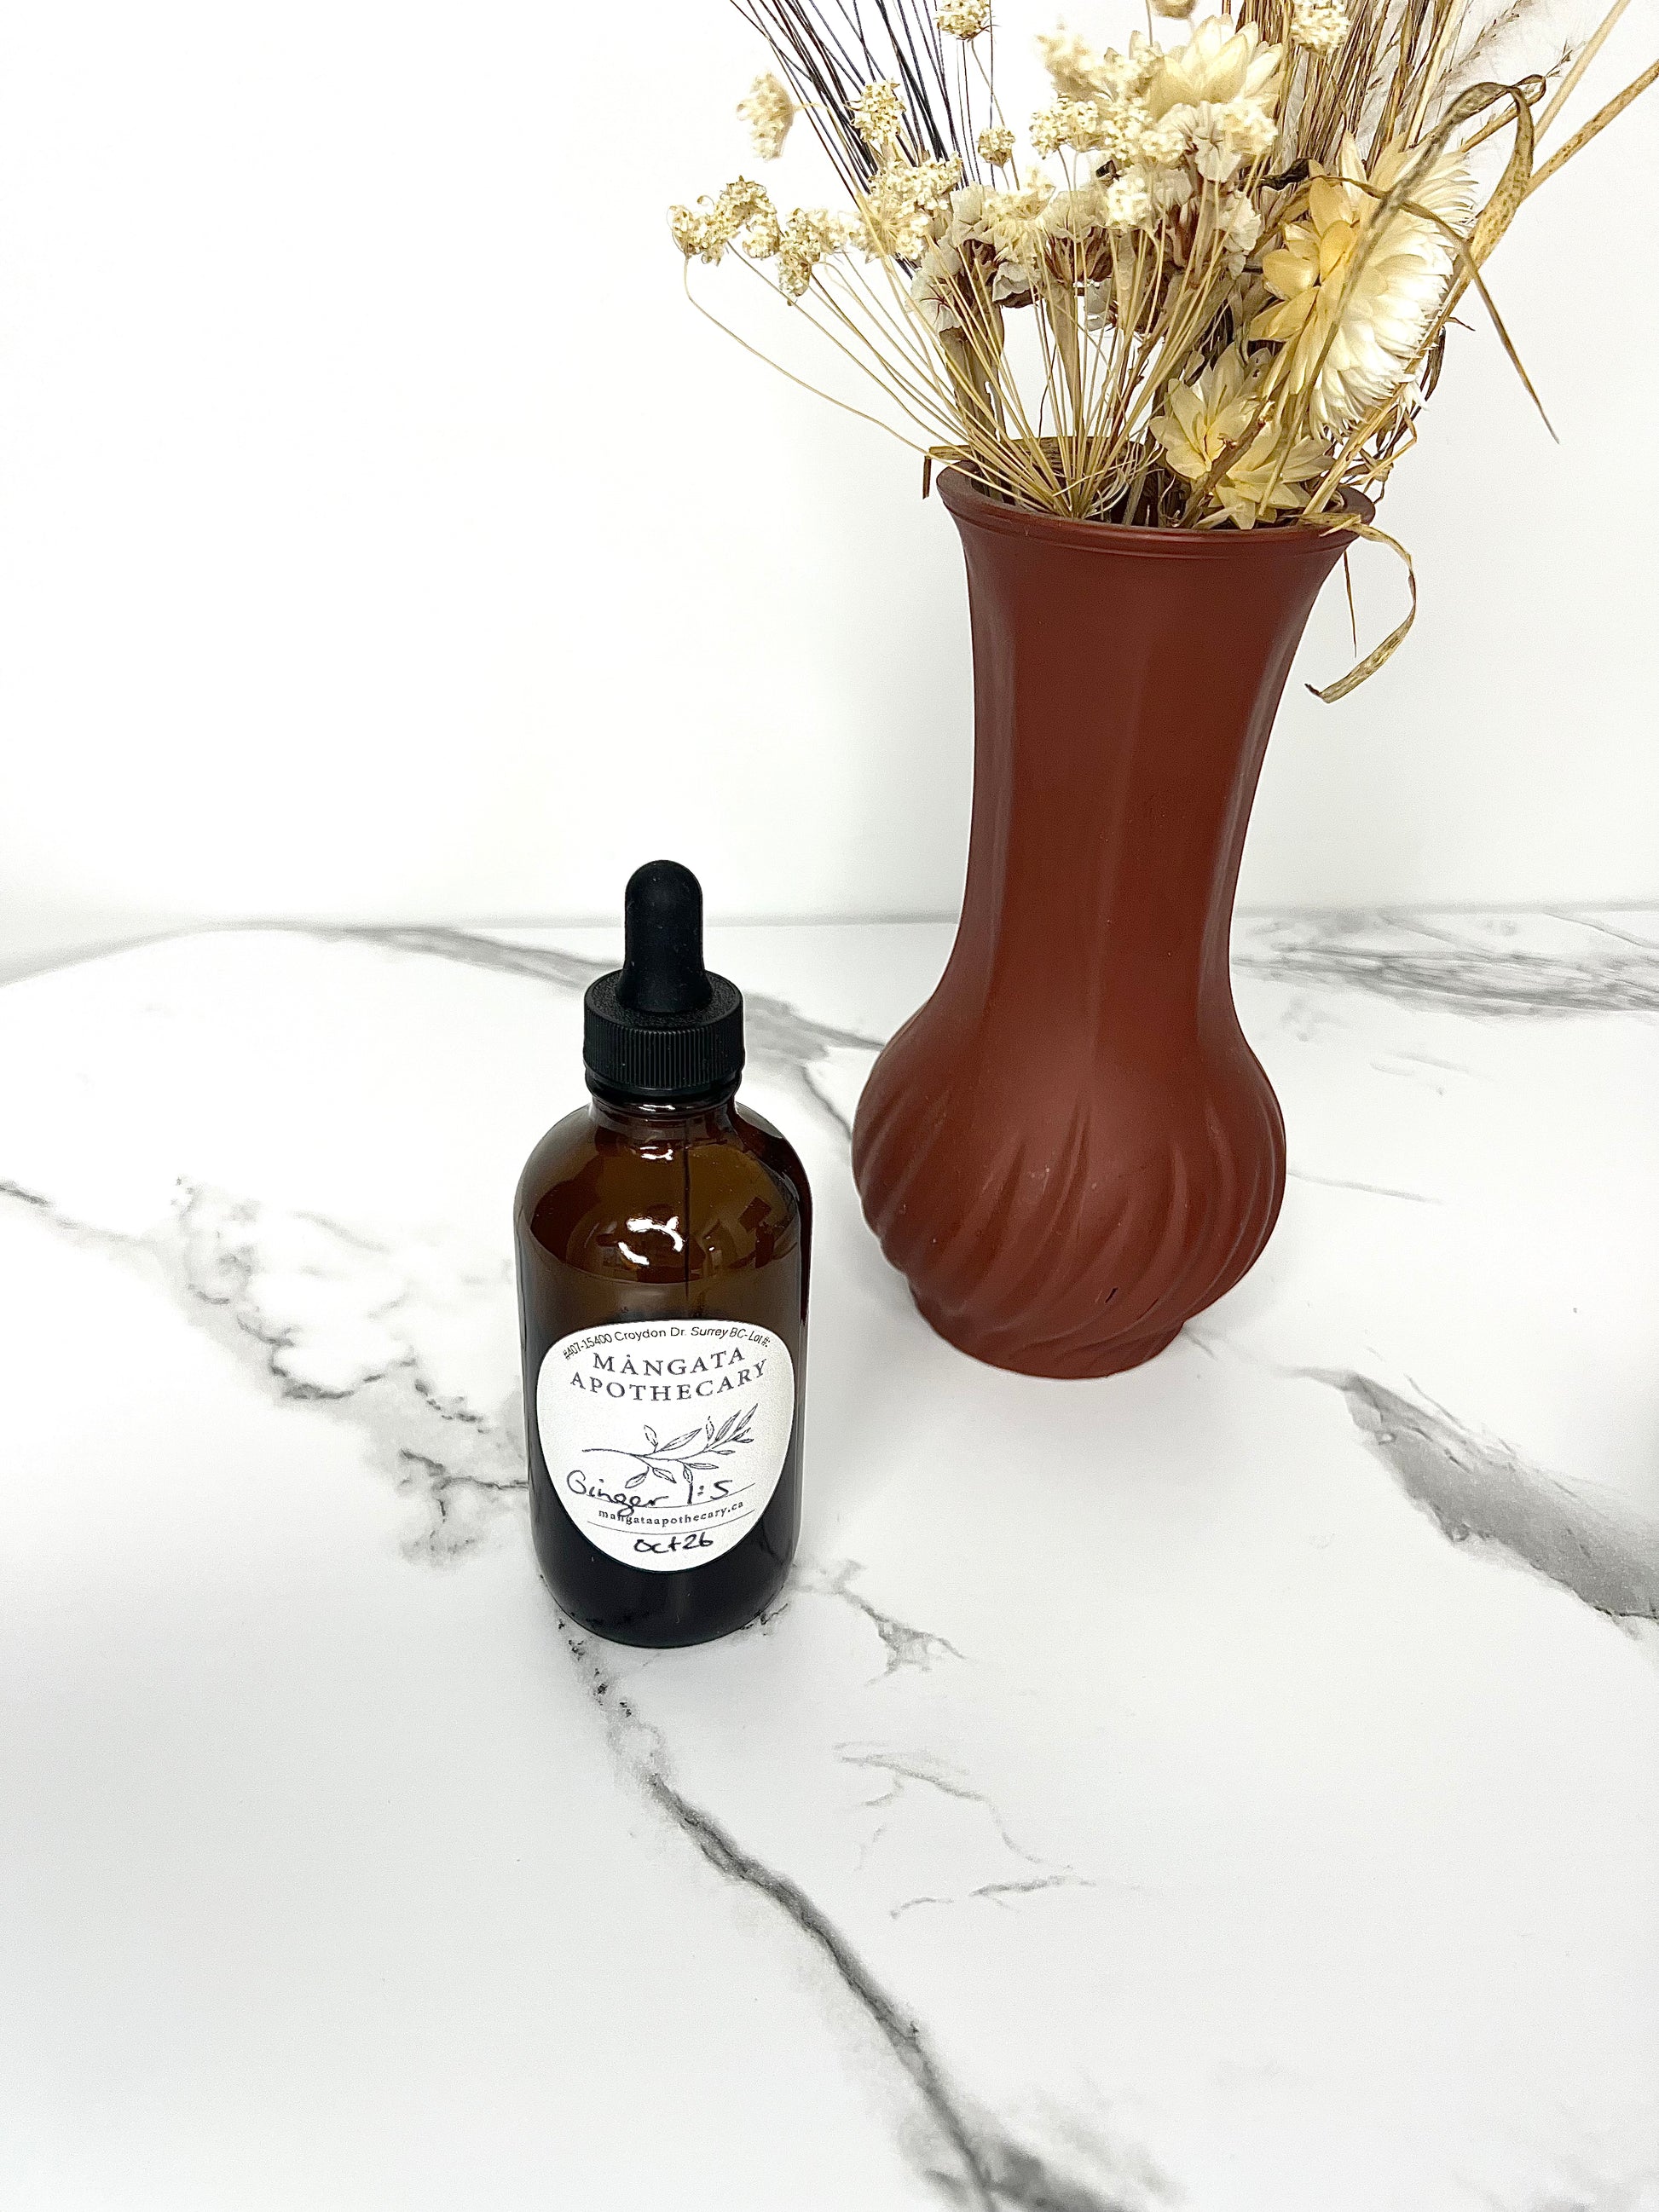 Ginger Tincture - Product Image For Mangata Dispensary